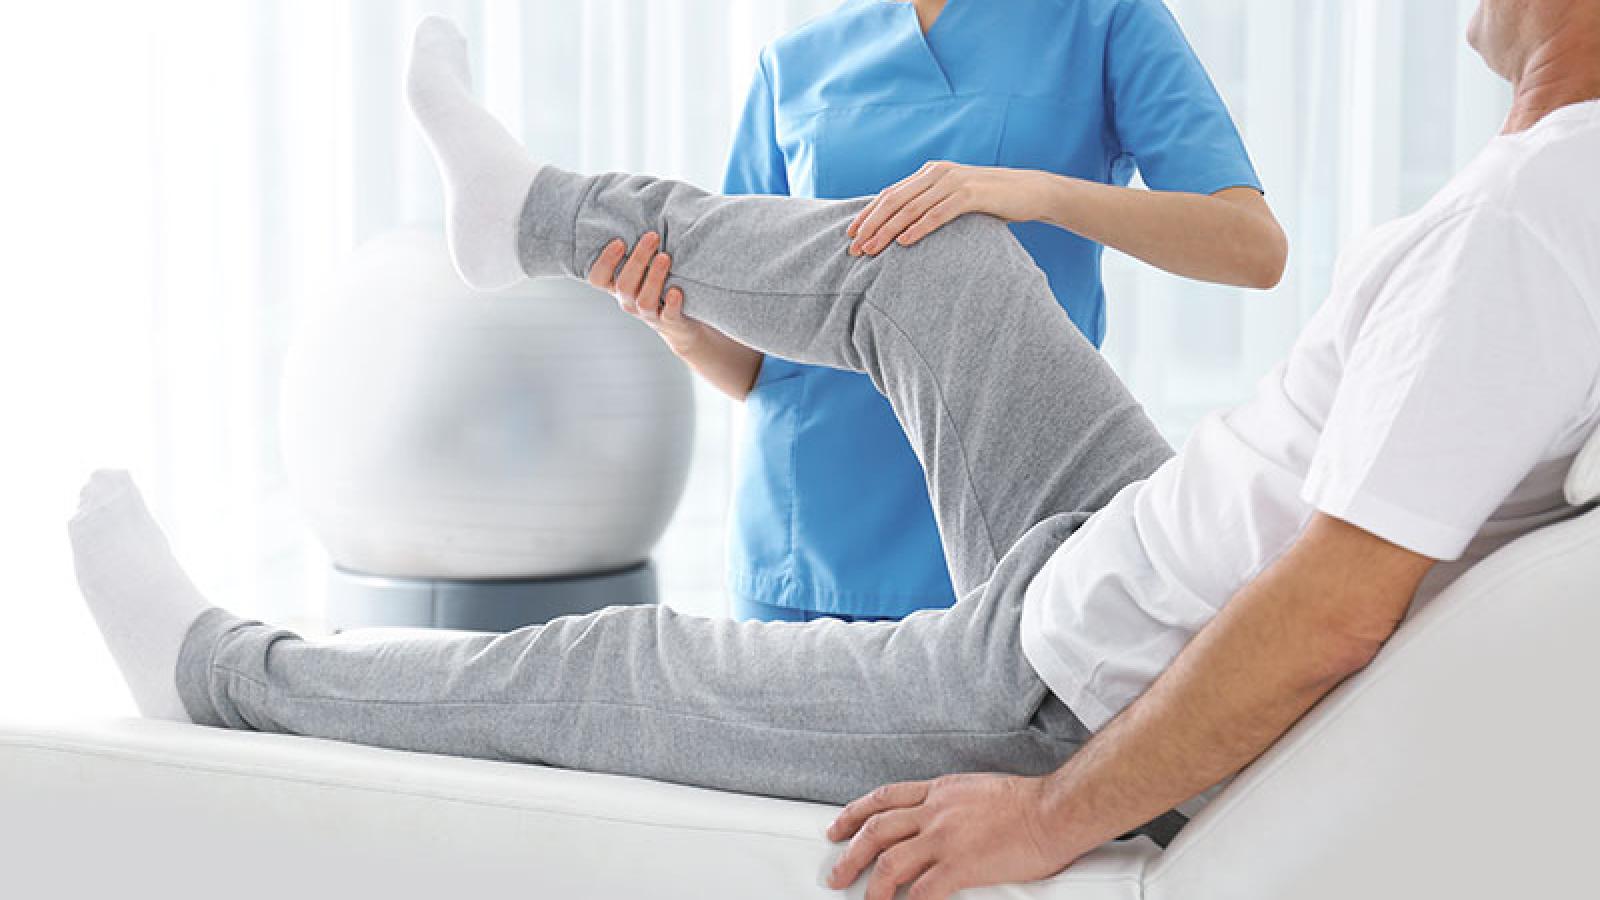 5 Benefits of Physical Therapy after Surgery